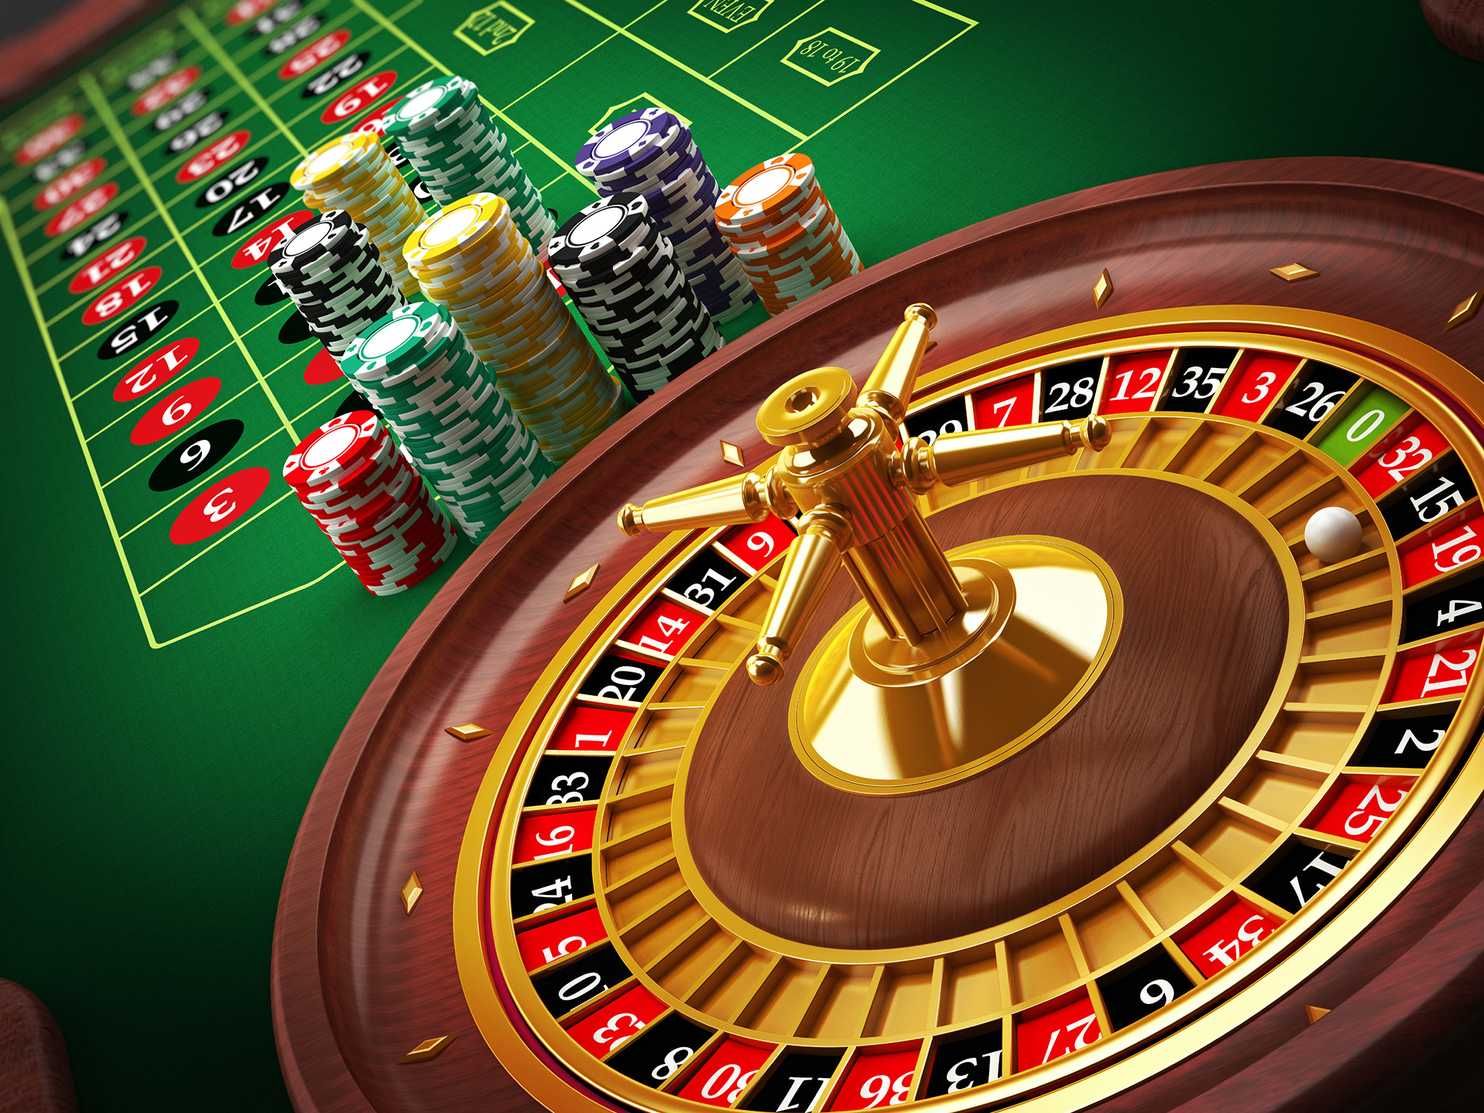 Strategies to Use at an Online Casino